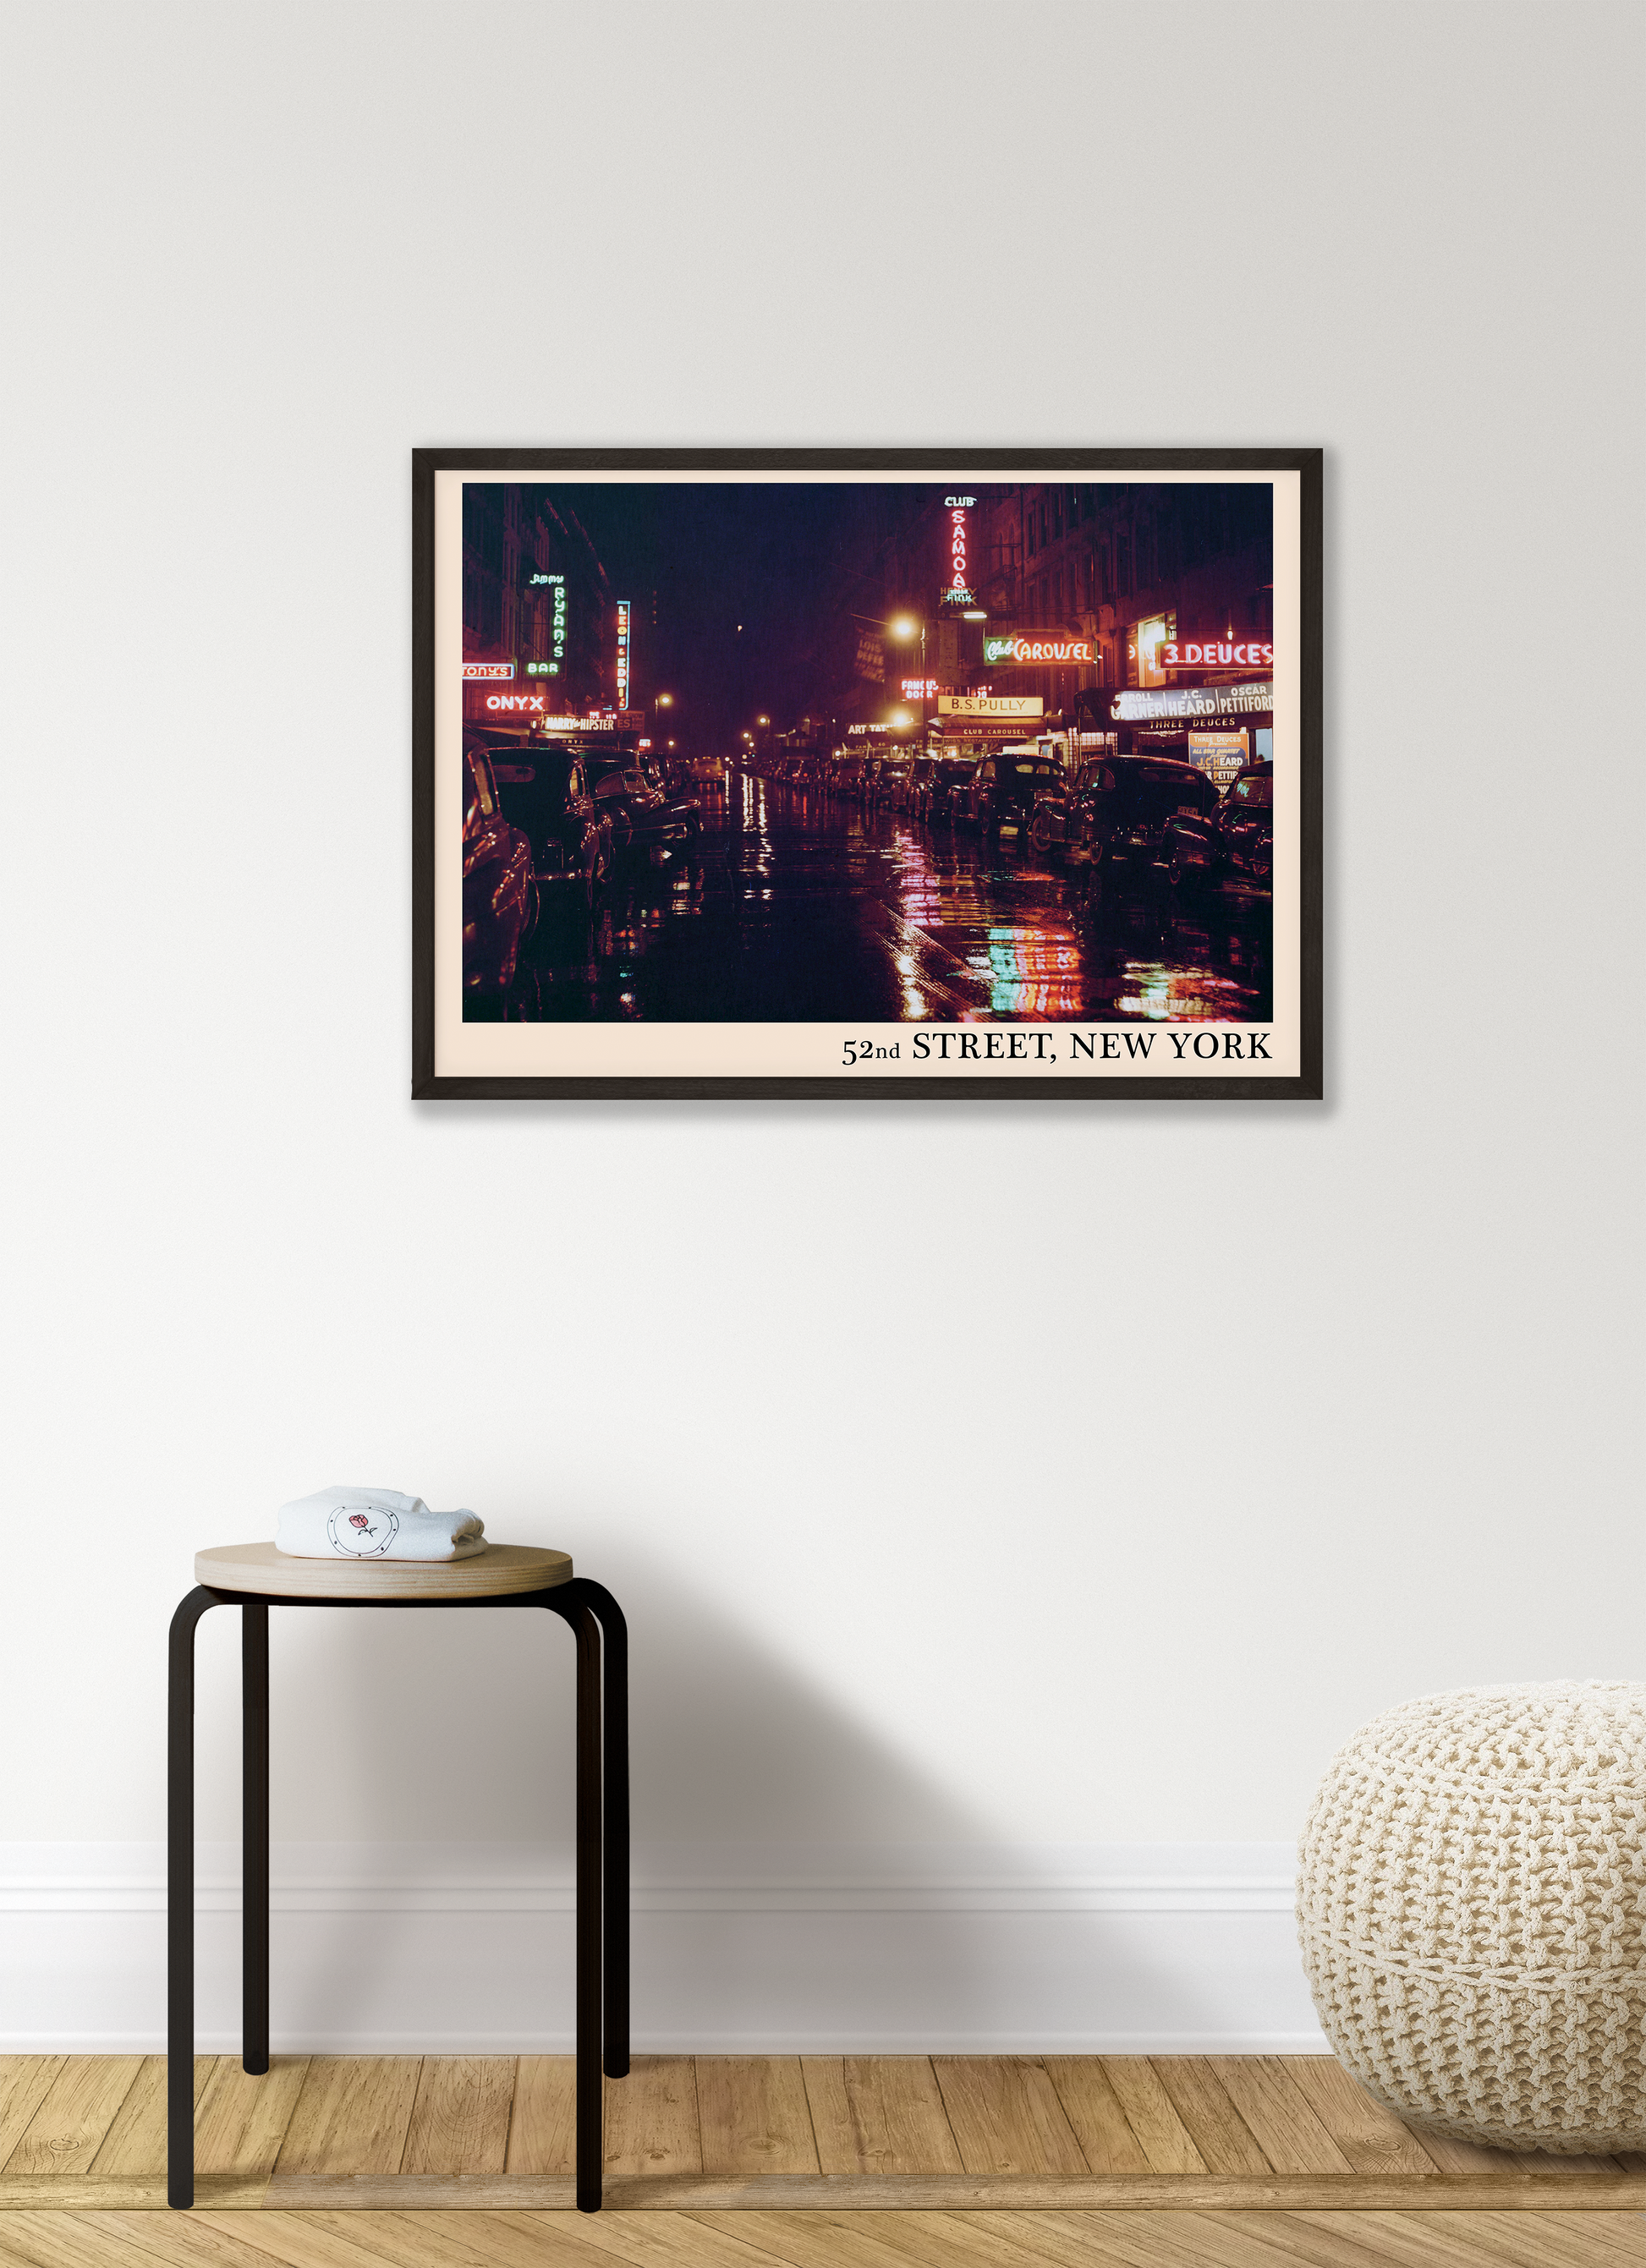 Iconic 52nd Street in New York captured in a retro black framed jazz venue poster, hanging on a white living room wall